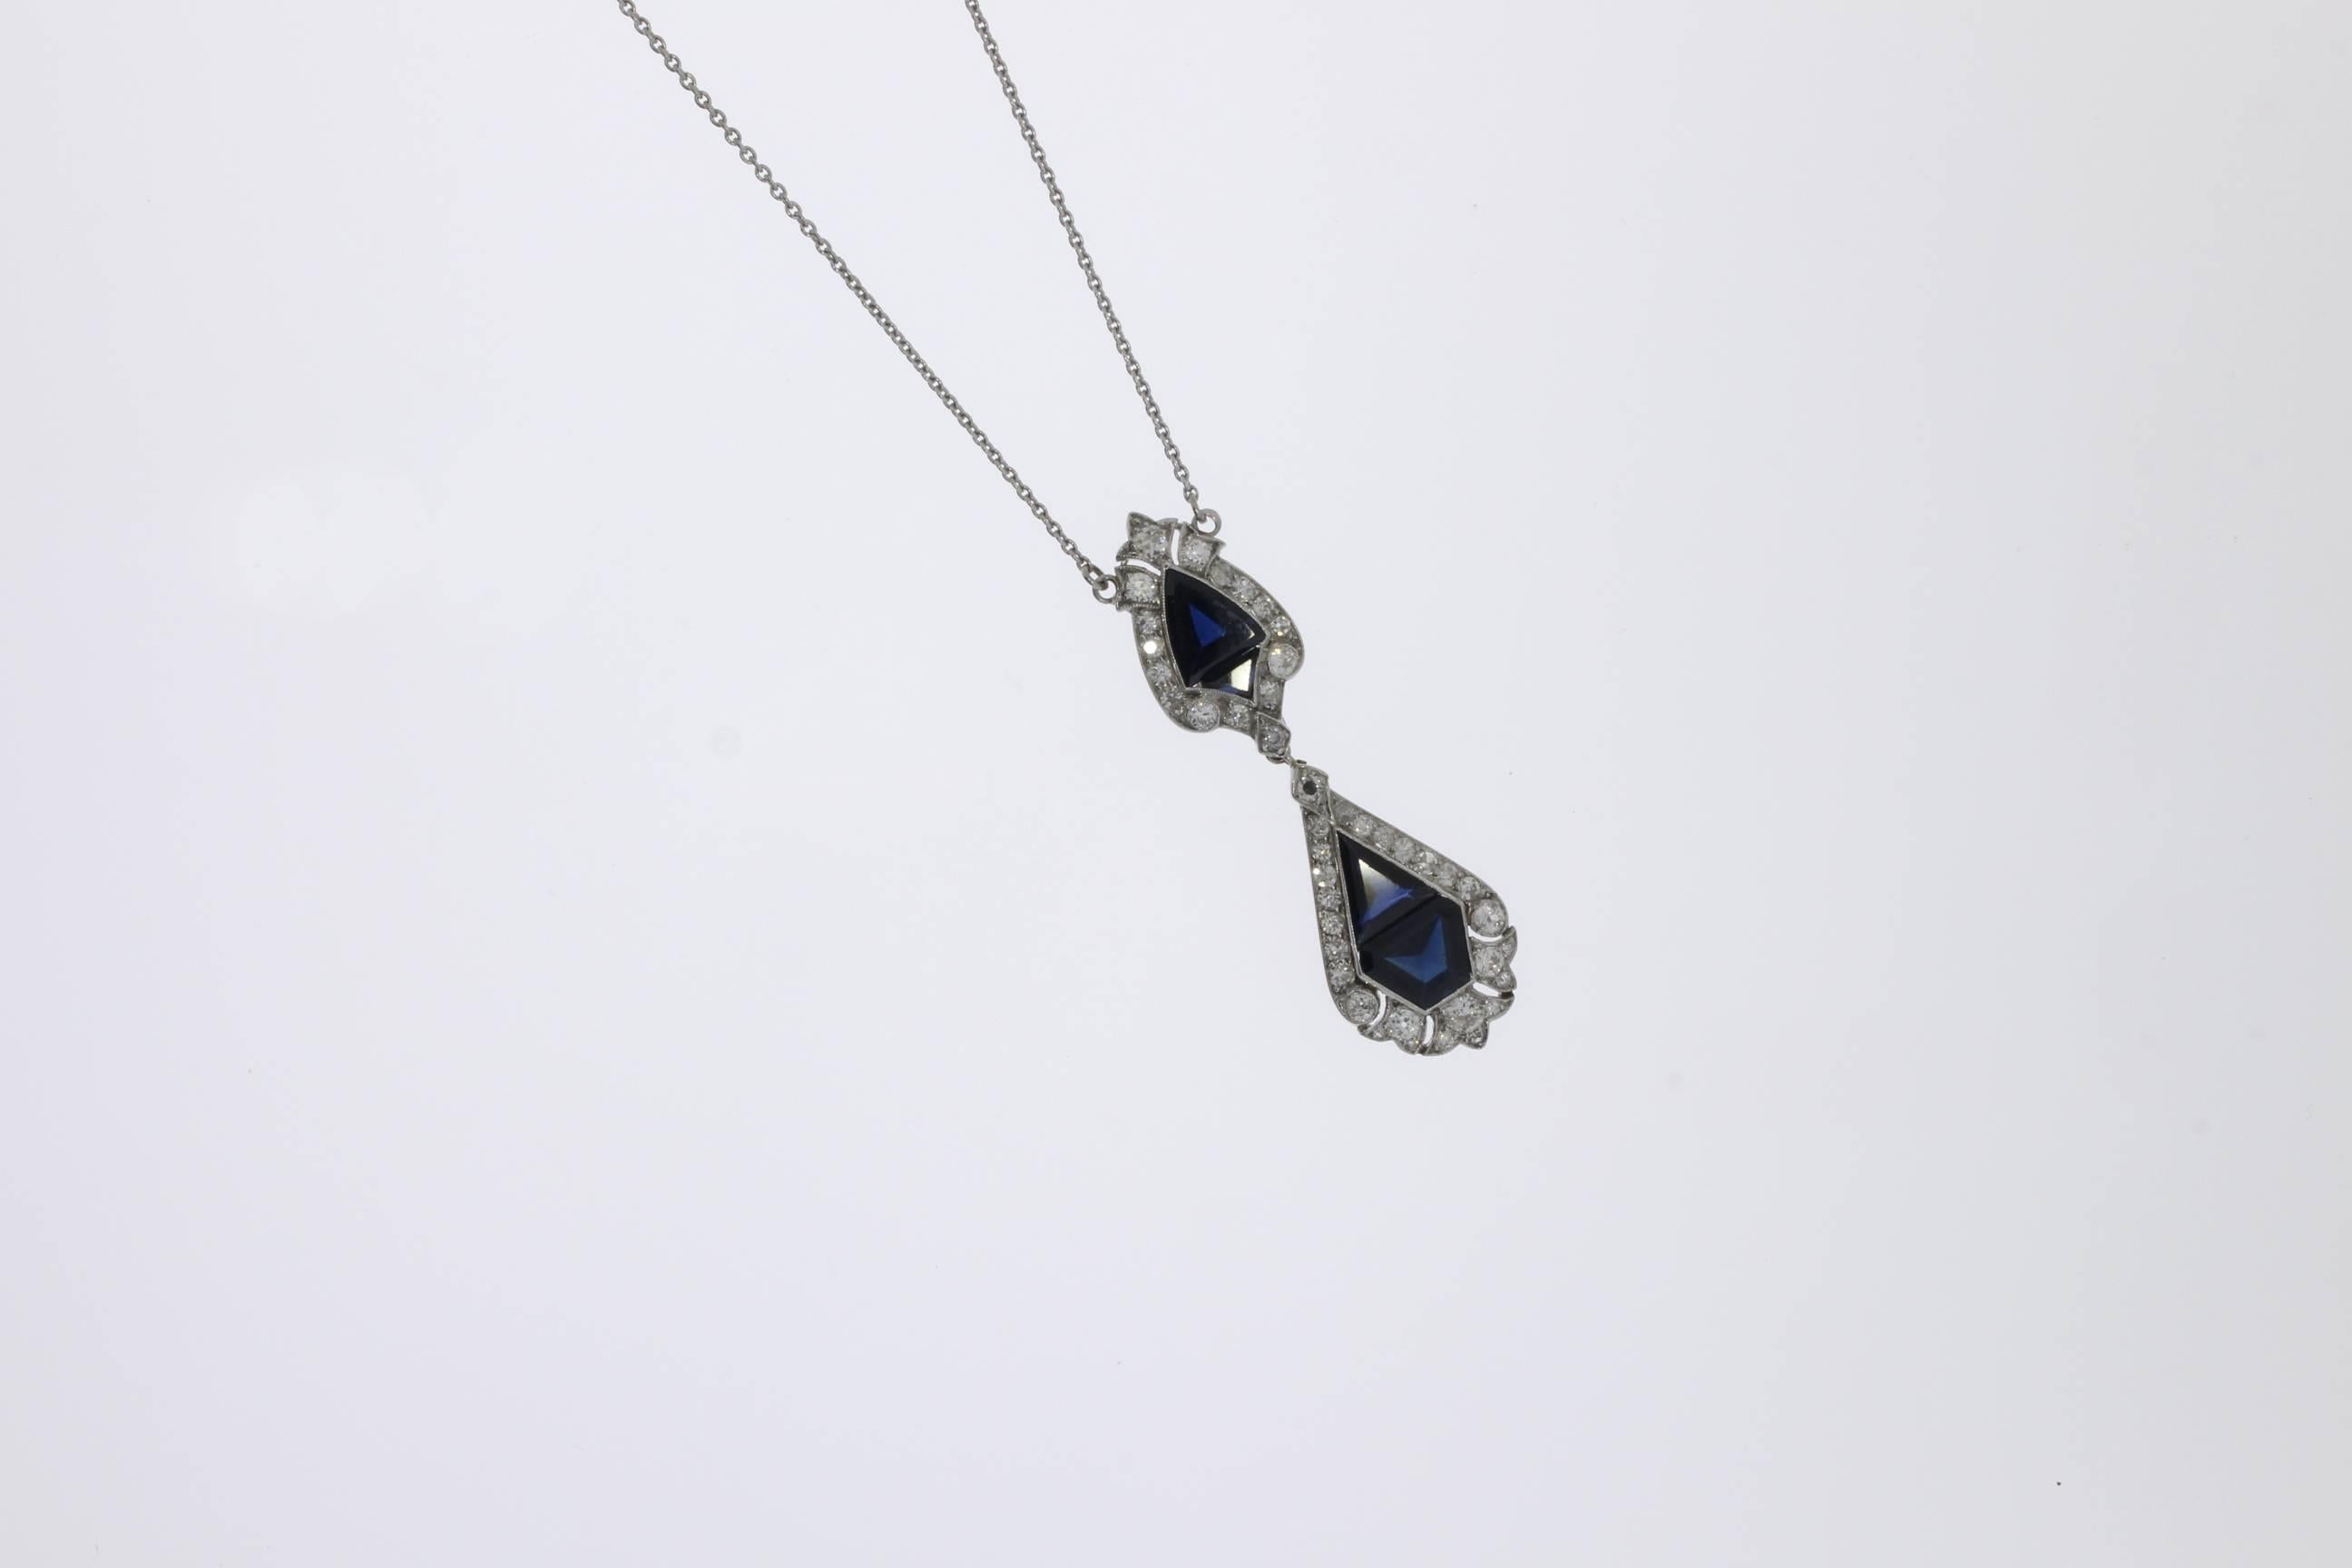 Germany, 2000's. Fine millegrain platinum set with 4 pailin sapphire weighing circa 4,43 ct., surrounded by 43 brilliant-cut and transitional-cut diamonds weighing total circa 1,44 ct. clarity SI, color wesselton. 14K white gold delicate cable chain